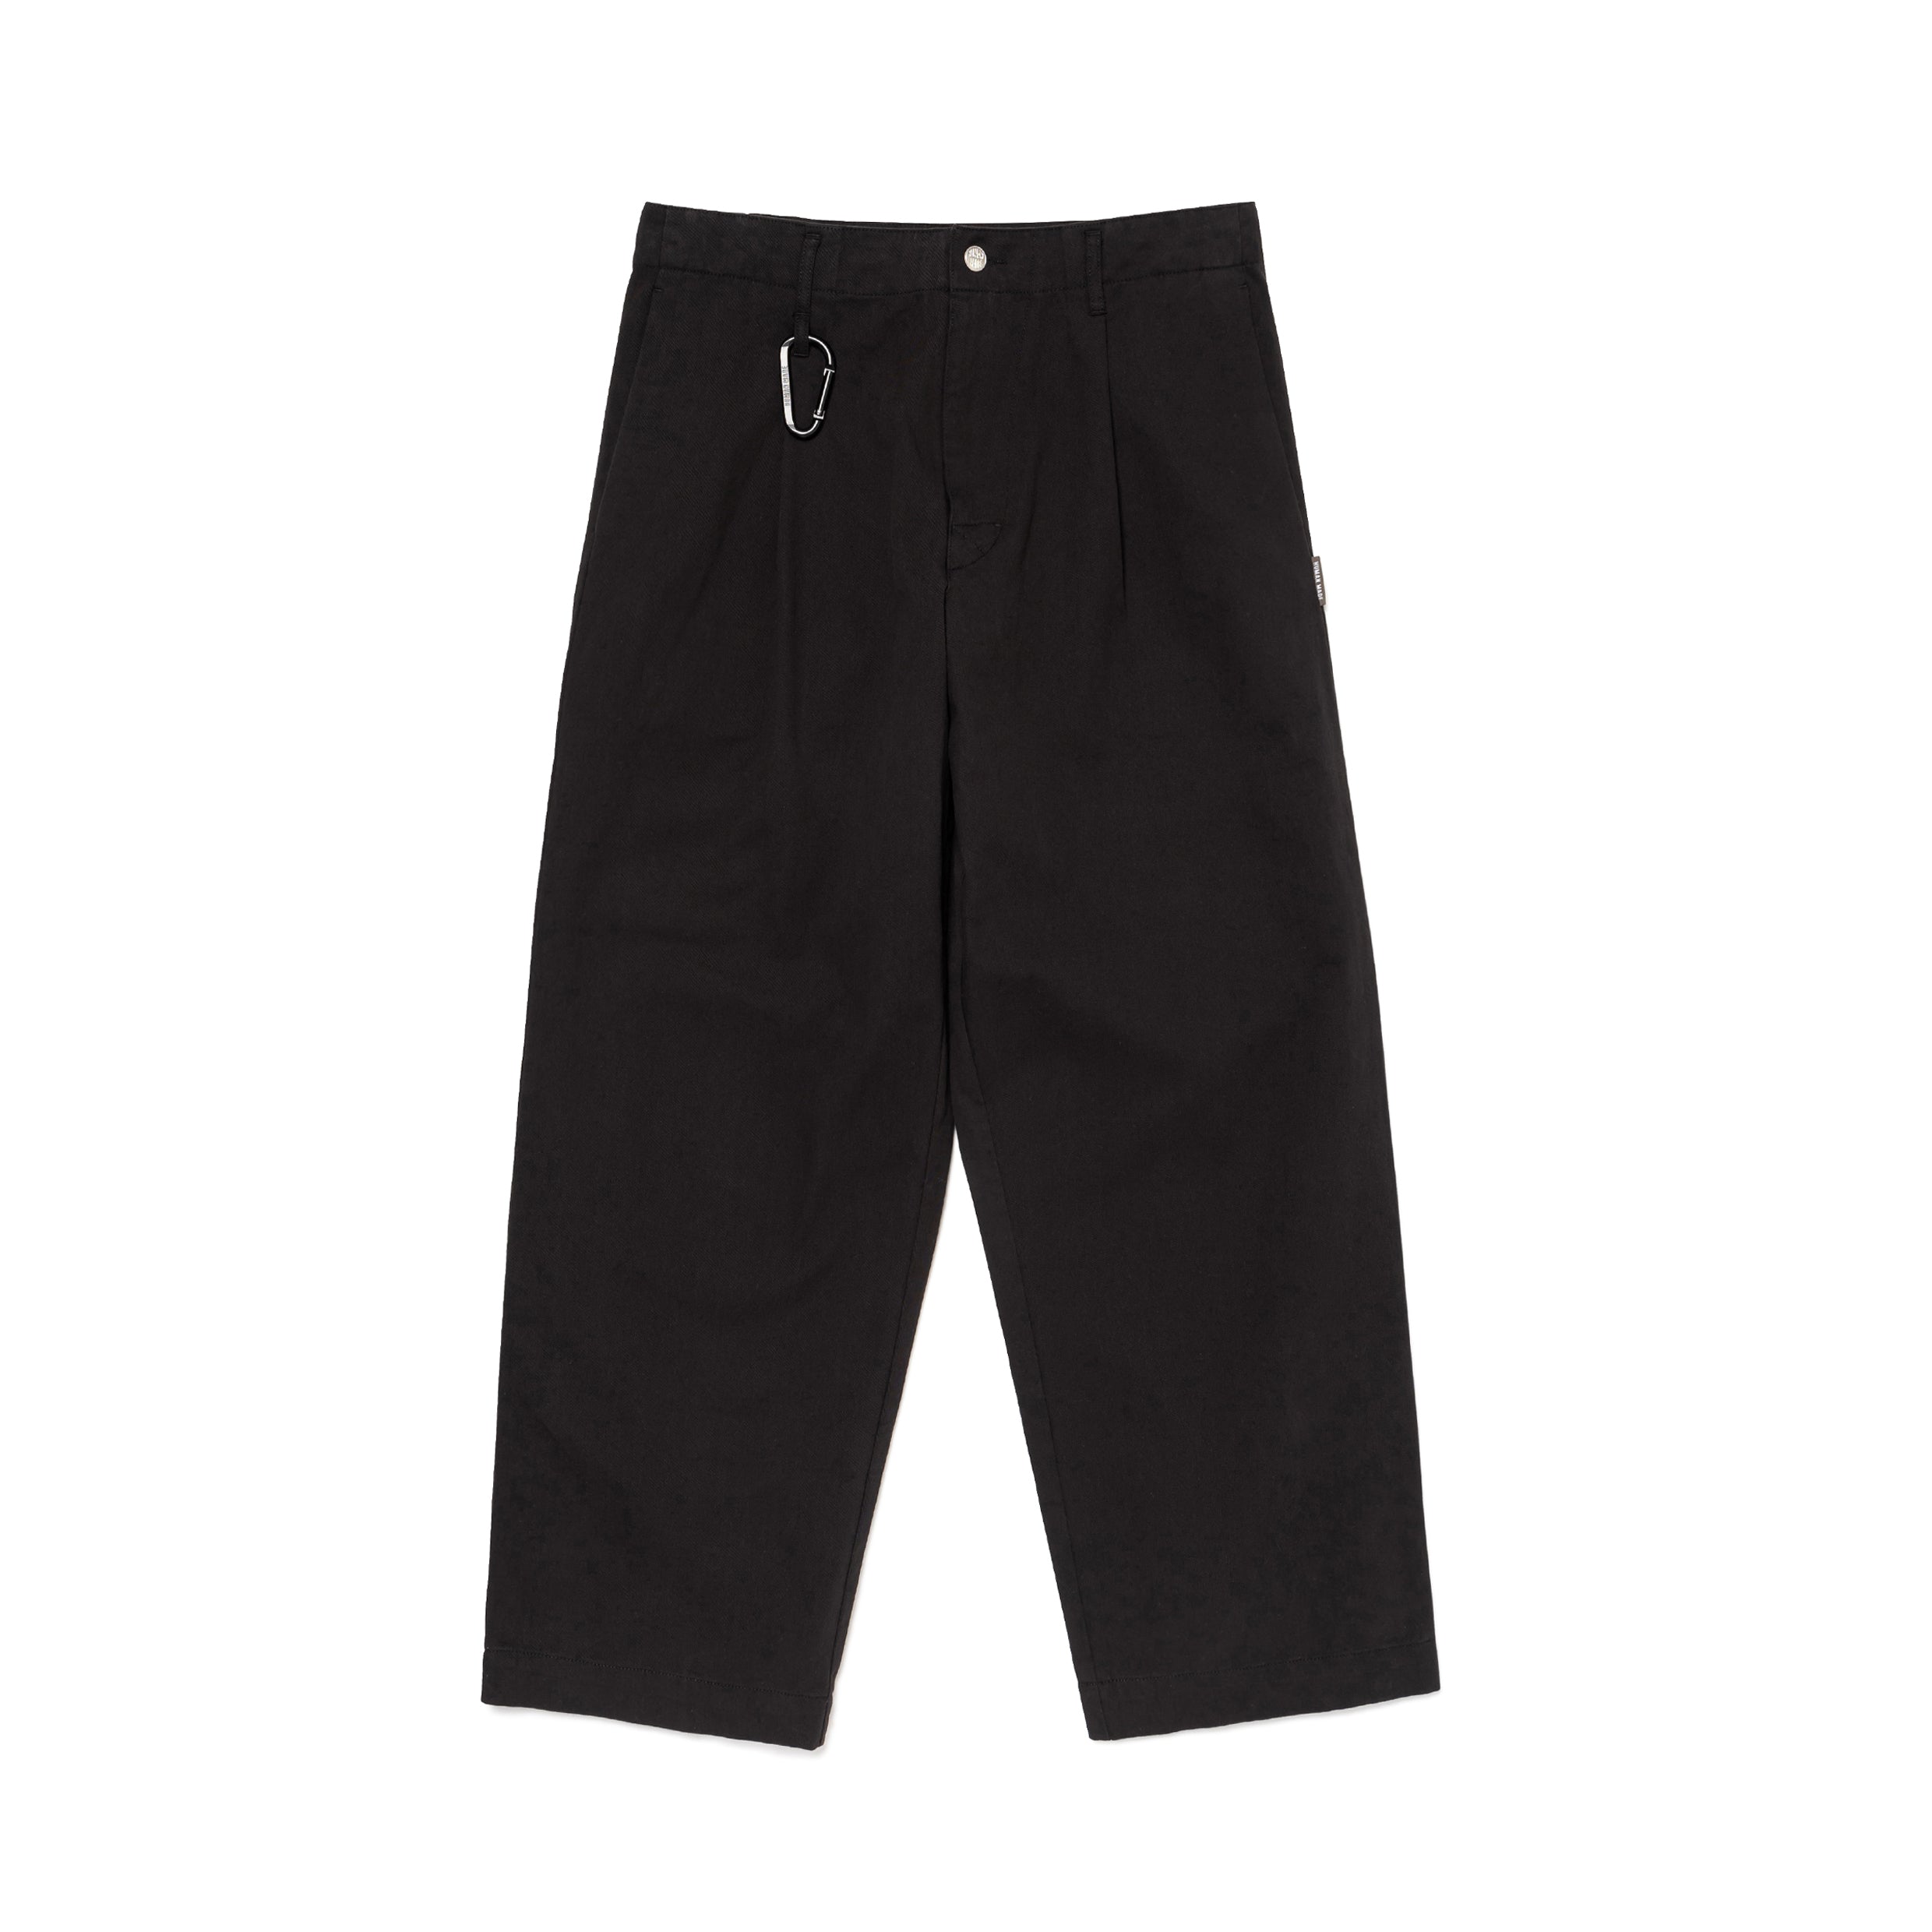 SKATER PANTS – HUMAN MADE ONLINE STORE